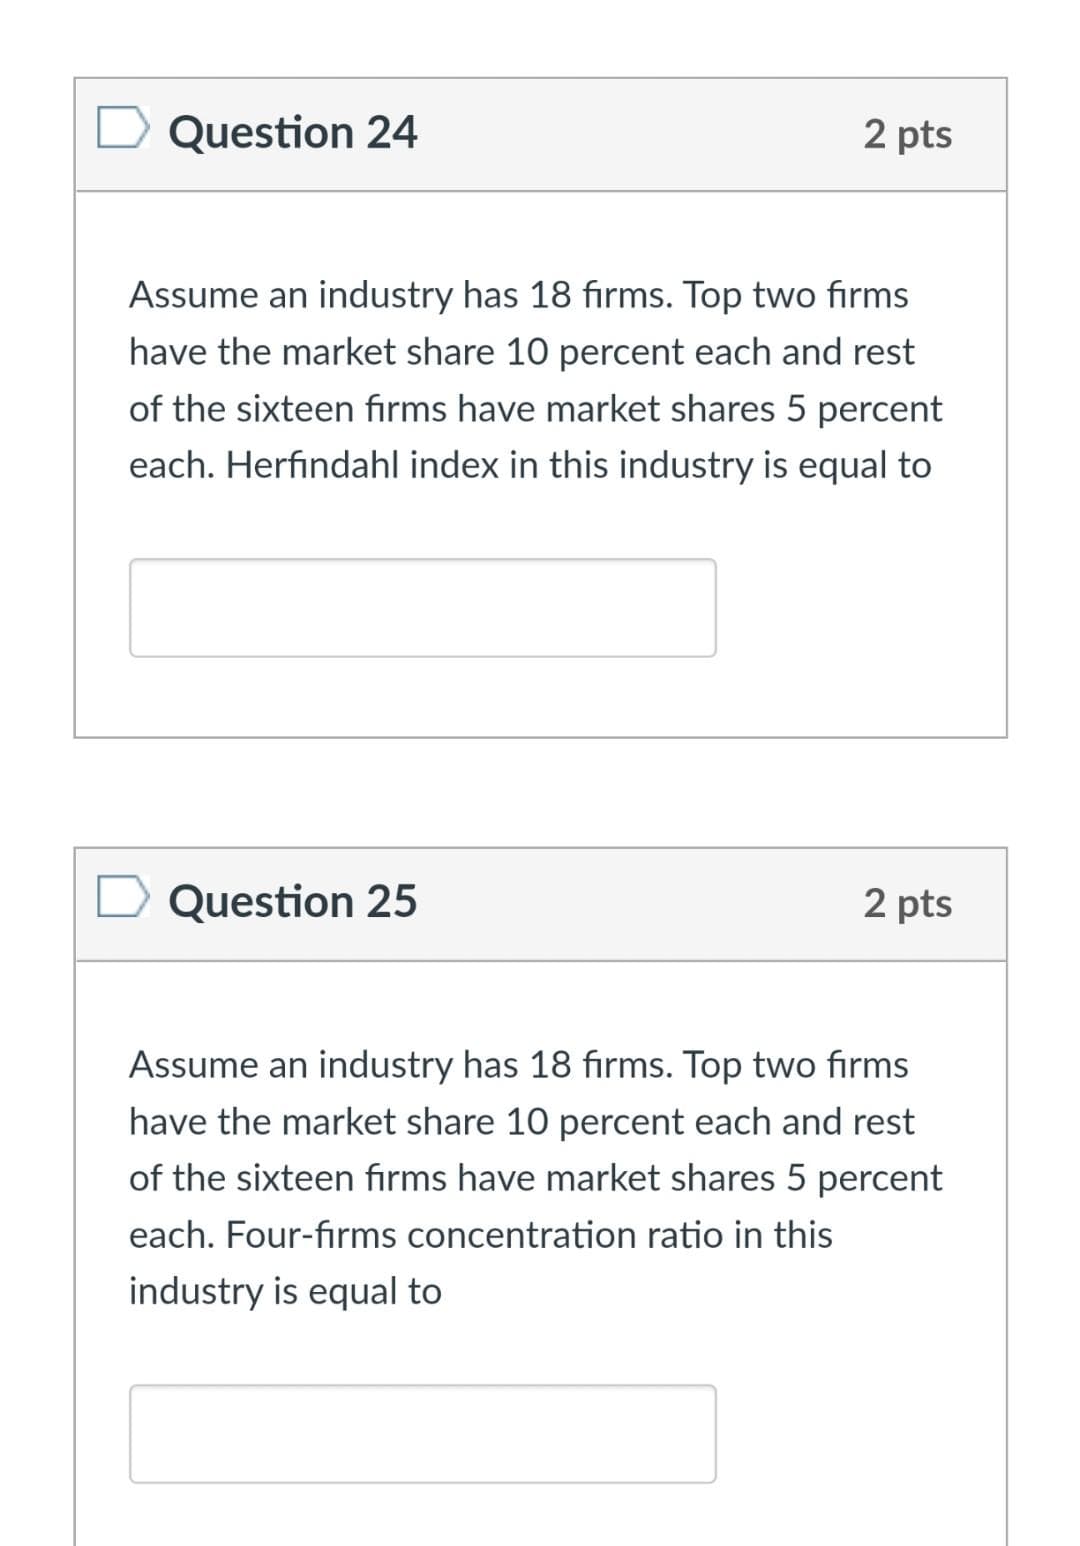 Question 24
2 pts
Assume an industry has 18 fırms. Top two firms
have the market share 10 percent each and rest
of the sixteen firms have market shares 5 percent
each. Herfindahl index in this industry is equal to
Question 25
2 pts
Assume an industry has 18 fırms. Top two firms
have the market share 10 percent each and rest
of the sixteen fırms have market shares 5 percent
each. Four-firms concentration ratio in this
industry is equal to
